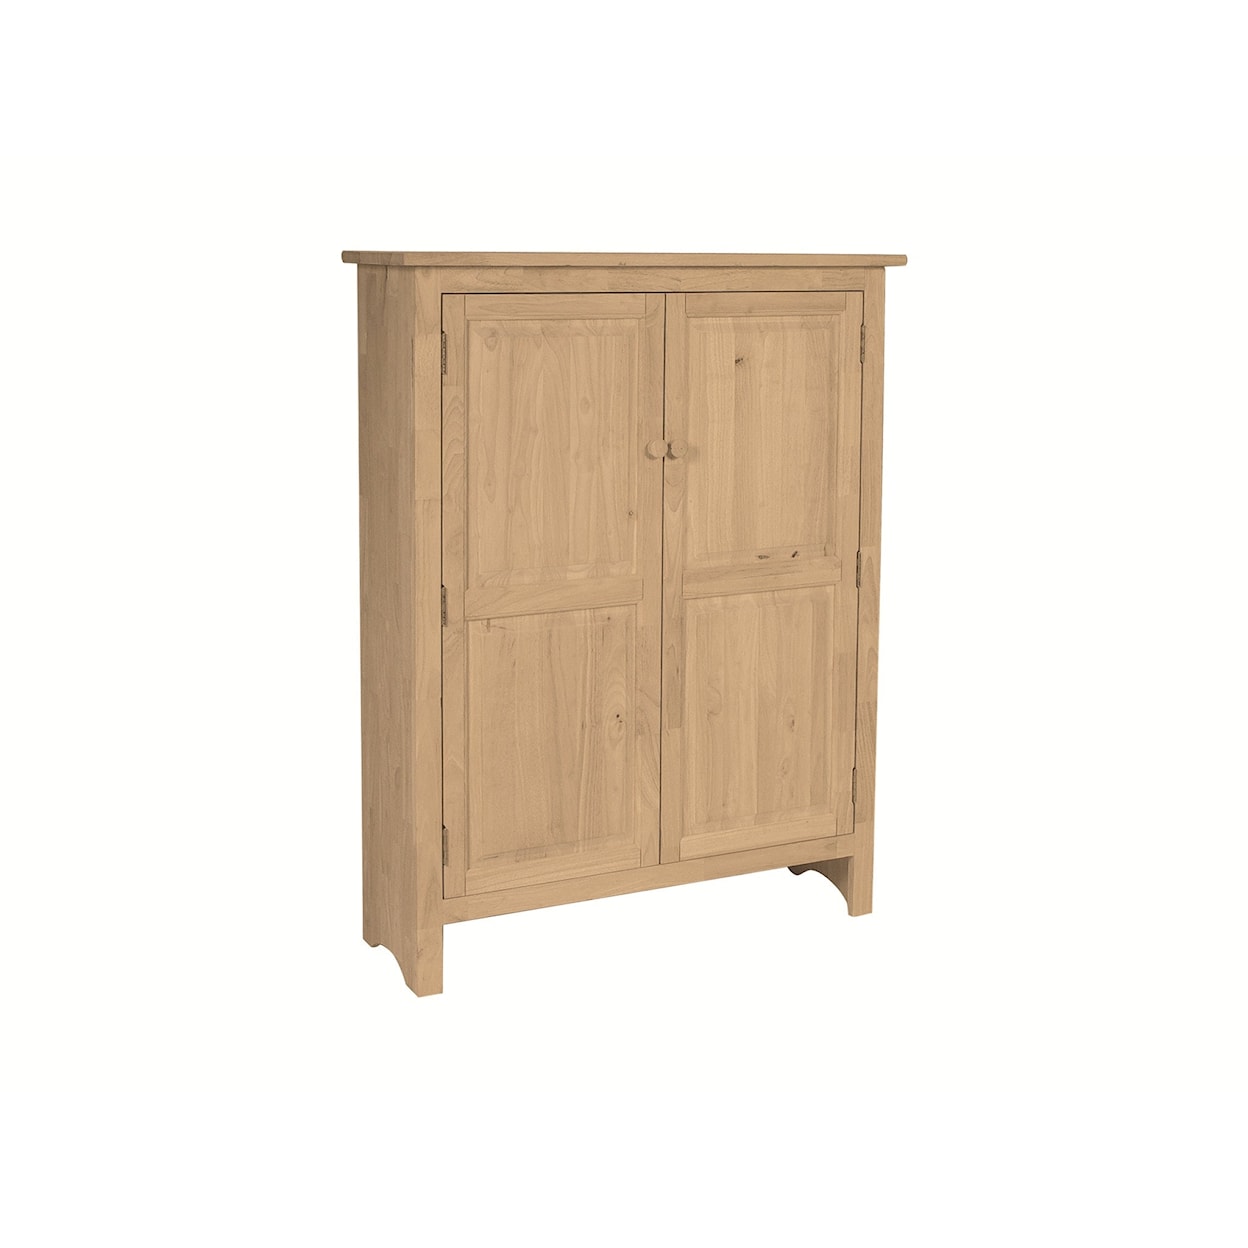 John Thomas SELECT Dining Room Double Jelly Cupboard